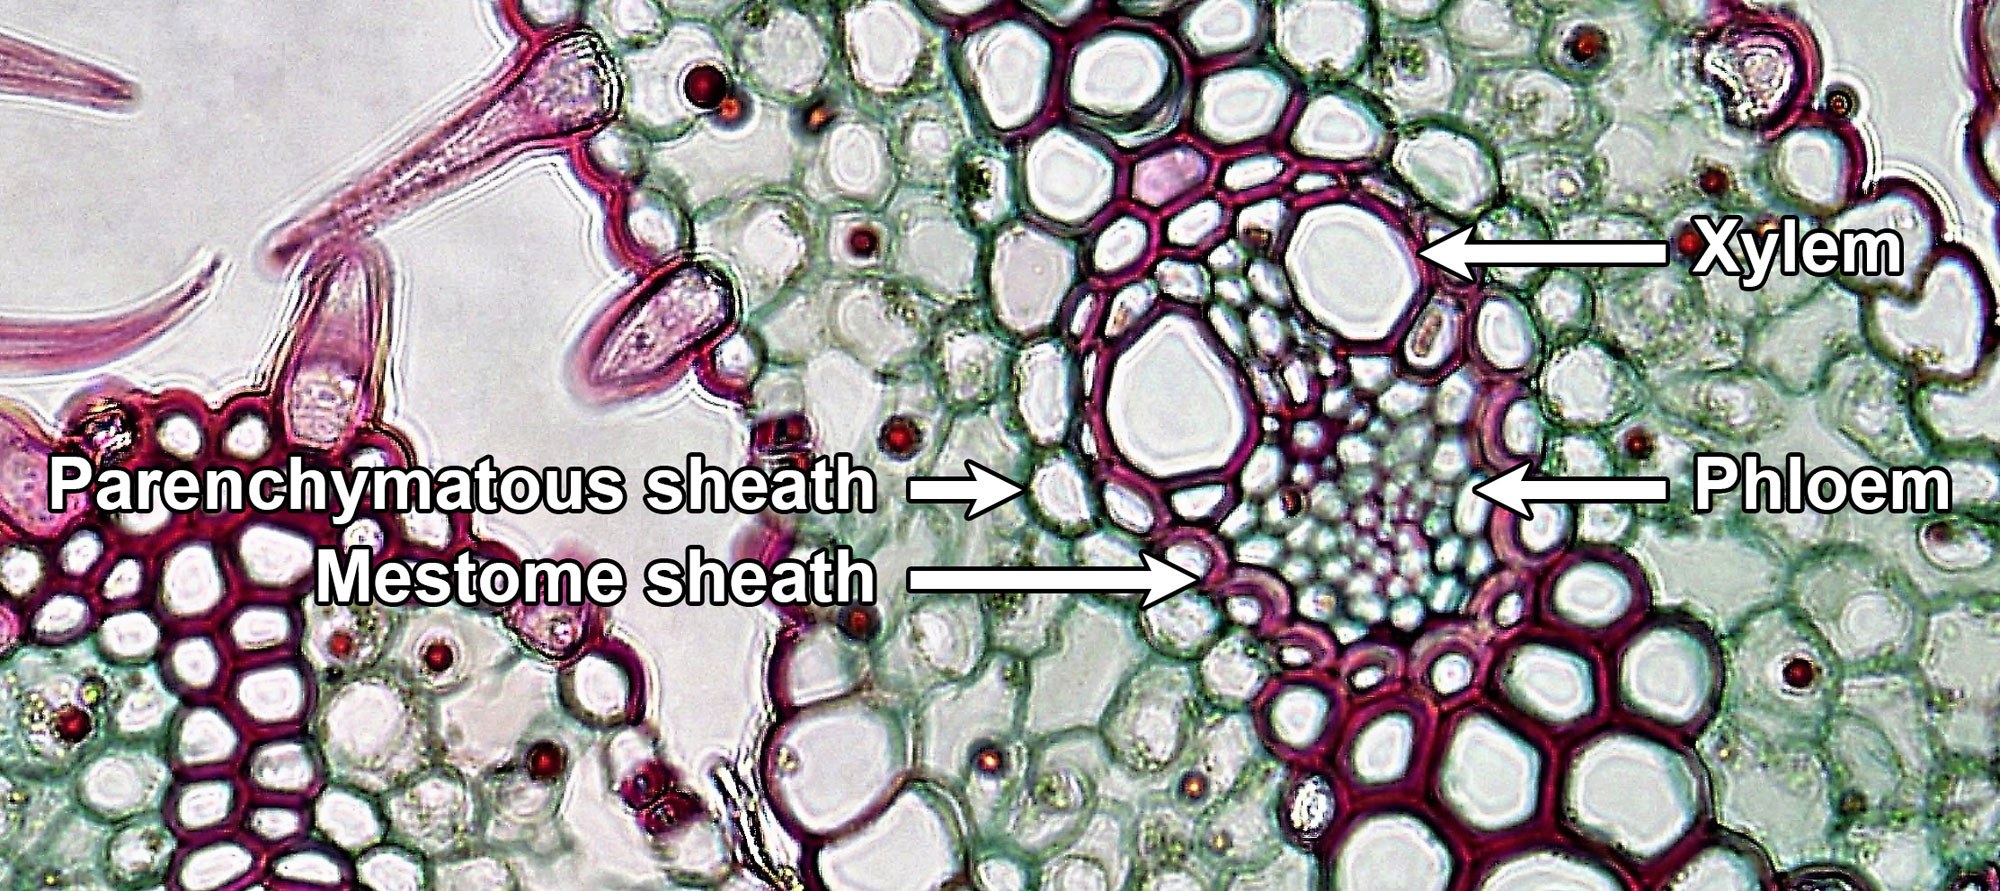 Photograph of a vascular bundle of the leaf of beachgrass in cross section taken under a microscope. The leaf has been stained to make the tissues stand out. The vascular is oval in shape with xylem towards the upper surface and phloem towards the lower surface. It is encircled by two layers of cells. The inner layer is the mestome sheath and the outer layer is the parenchymatous sheath. The cells of the mestome sheath have suberin and lignin in their side and inner walls, as indicated by the fact that these walls are thick and stained pink. The cells of the parenchyma sheath are larger with thinner walls.